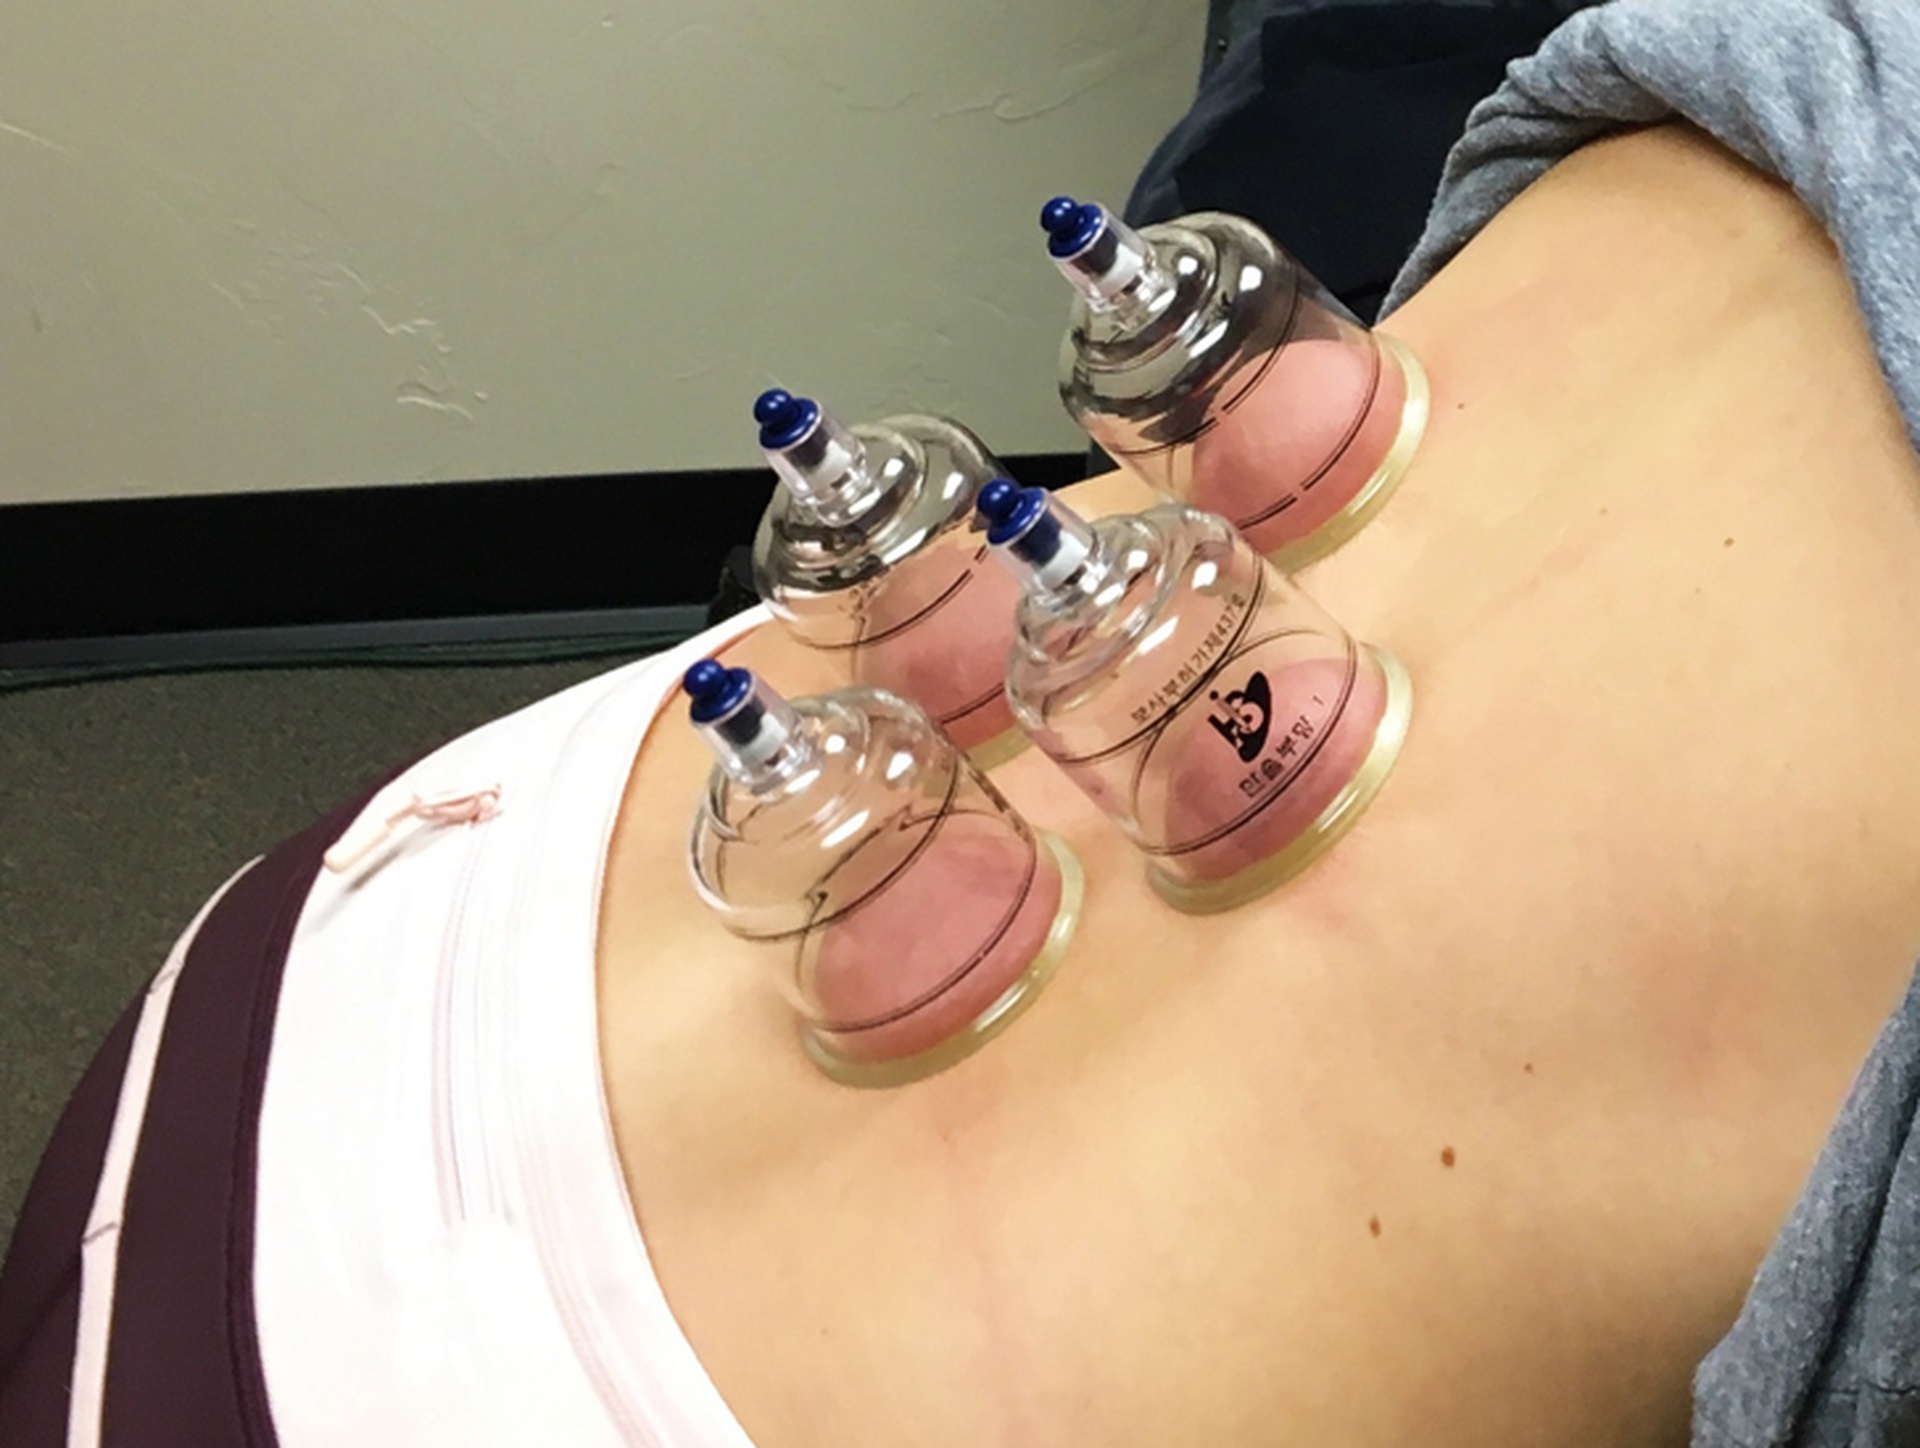 does cupping therapy work for sciatica